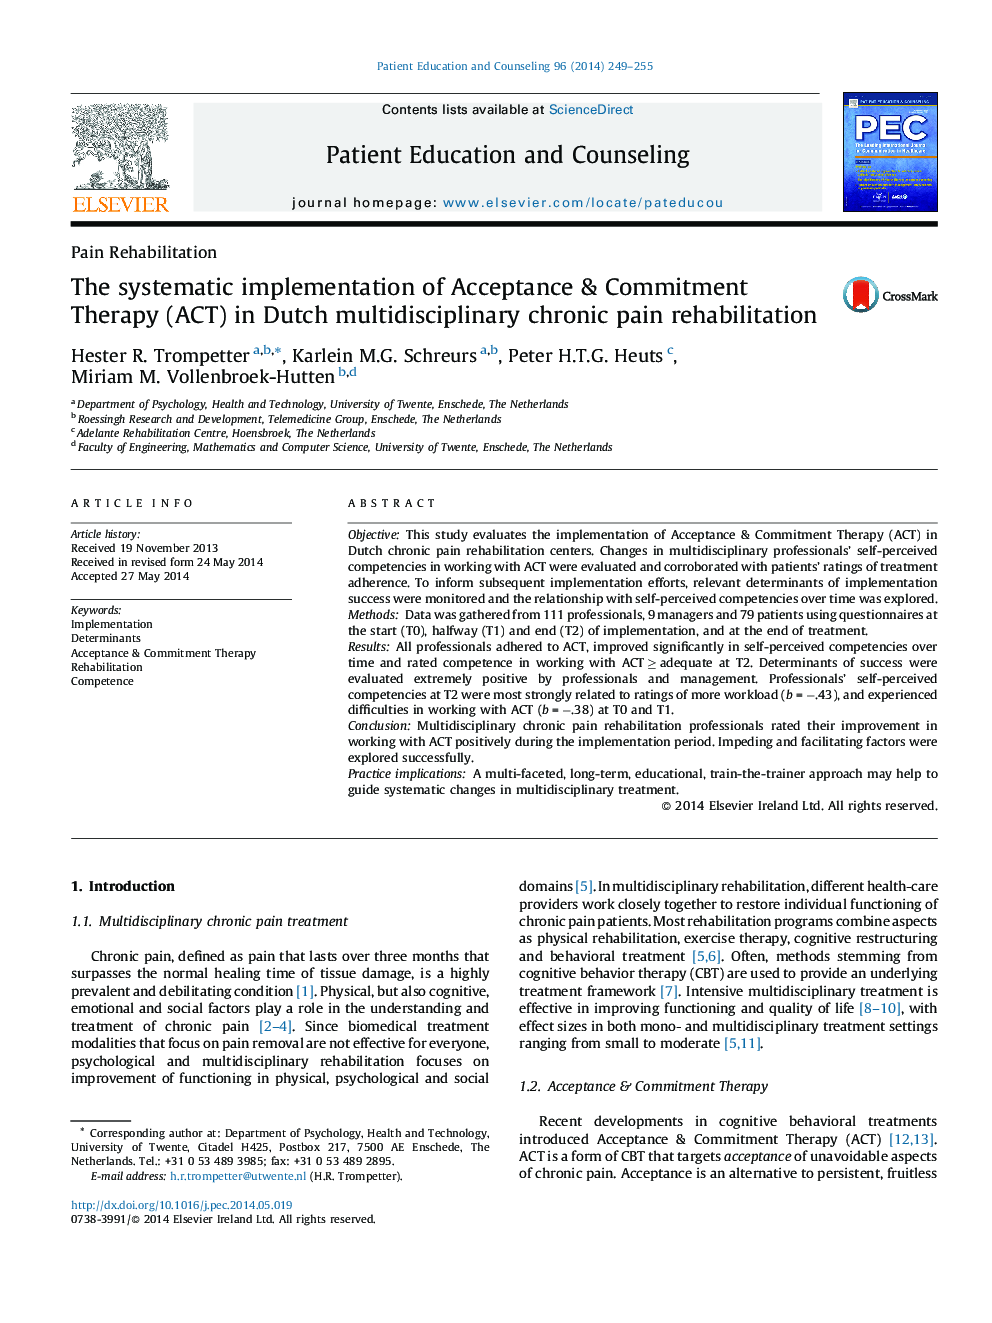 The systematic implementation of Acceptance & Commitment Therapy (ACT) in Dutch multidisciplinary chronic pain rehabilitation